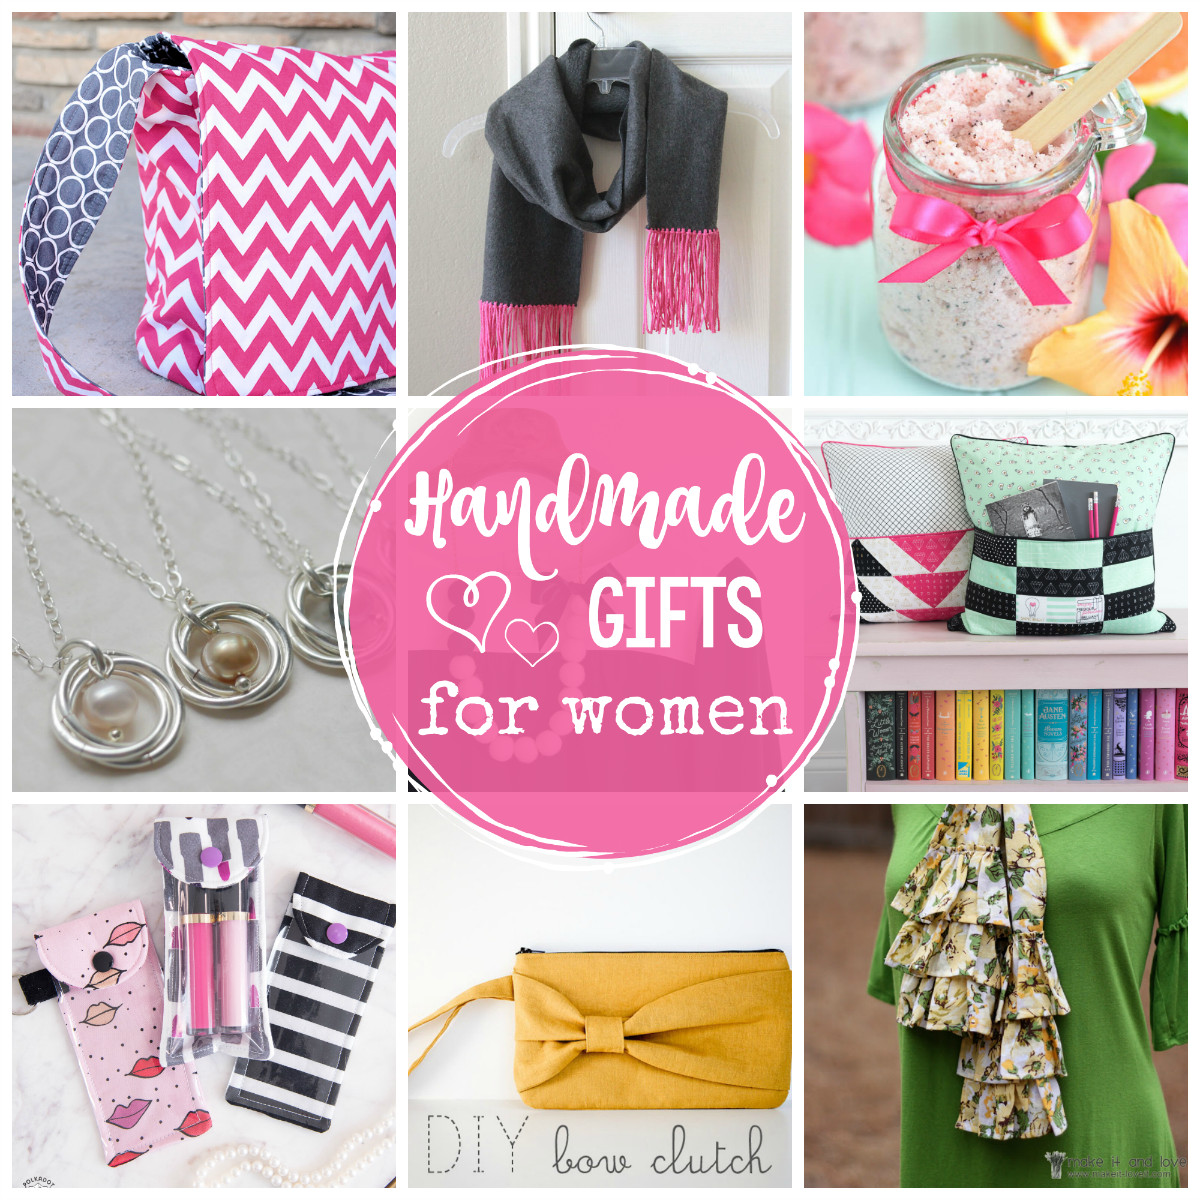 Birthday Gifts For Women
 25 Great Handmade Gifts for Women Crazy Little Projects